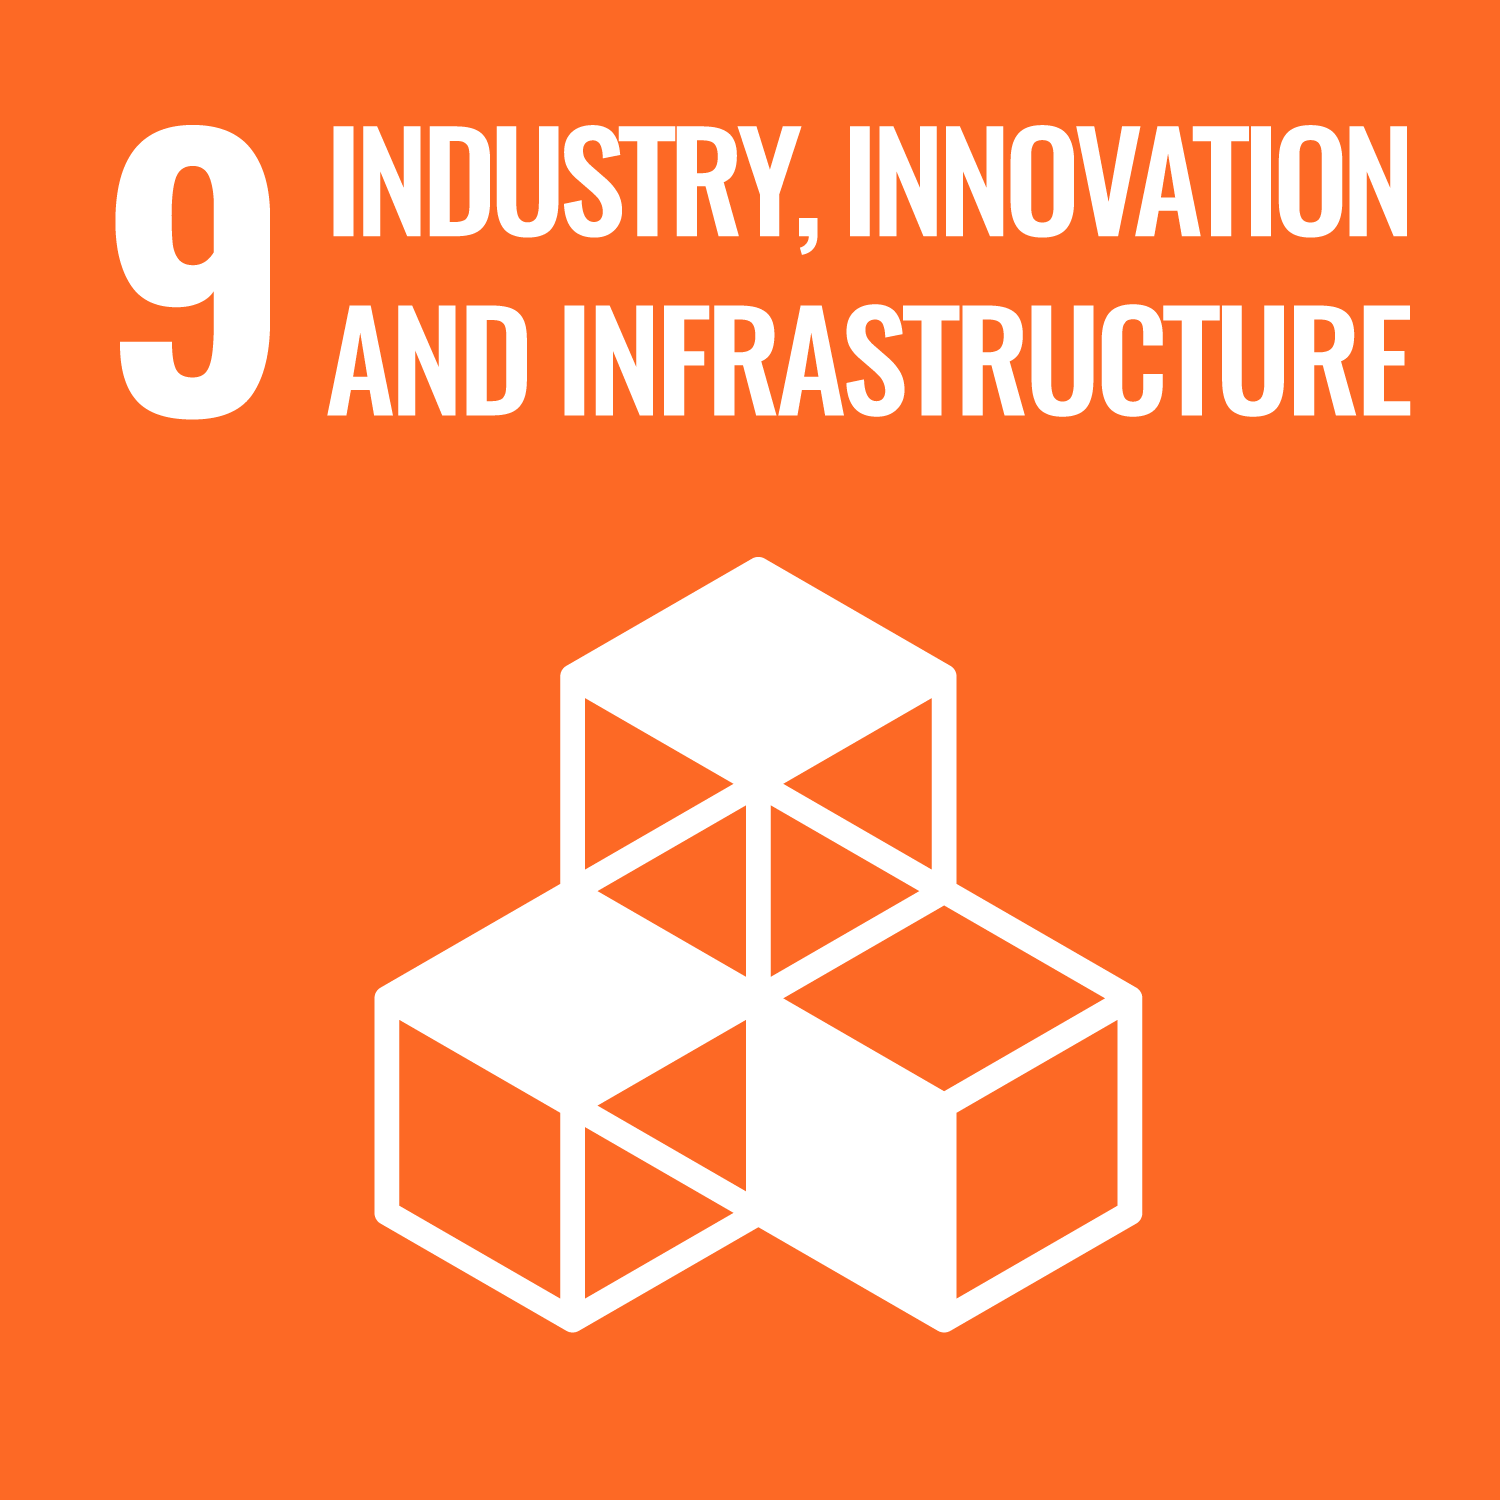 SDG Goal 9: Industry, Innovation and Infrastructure